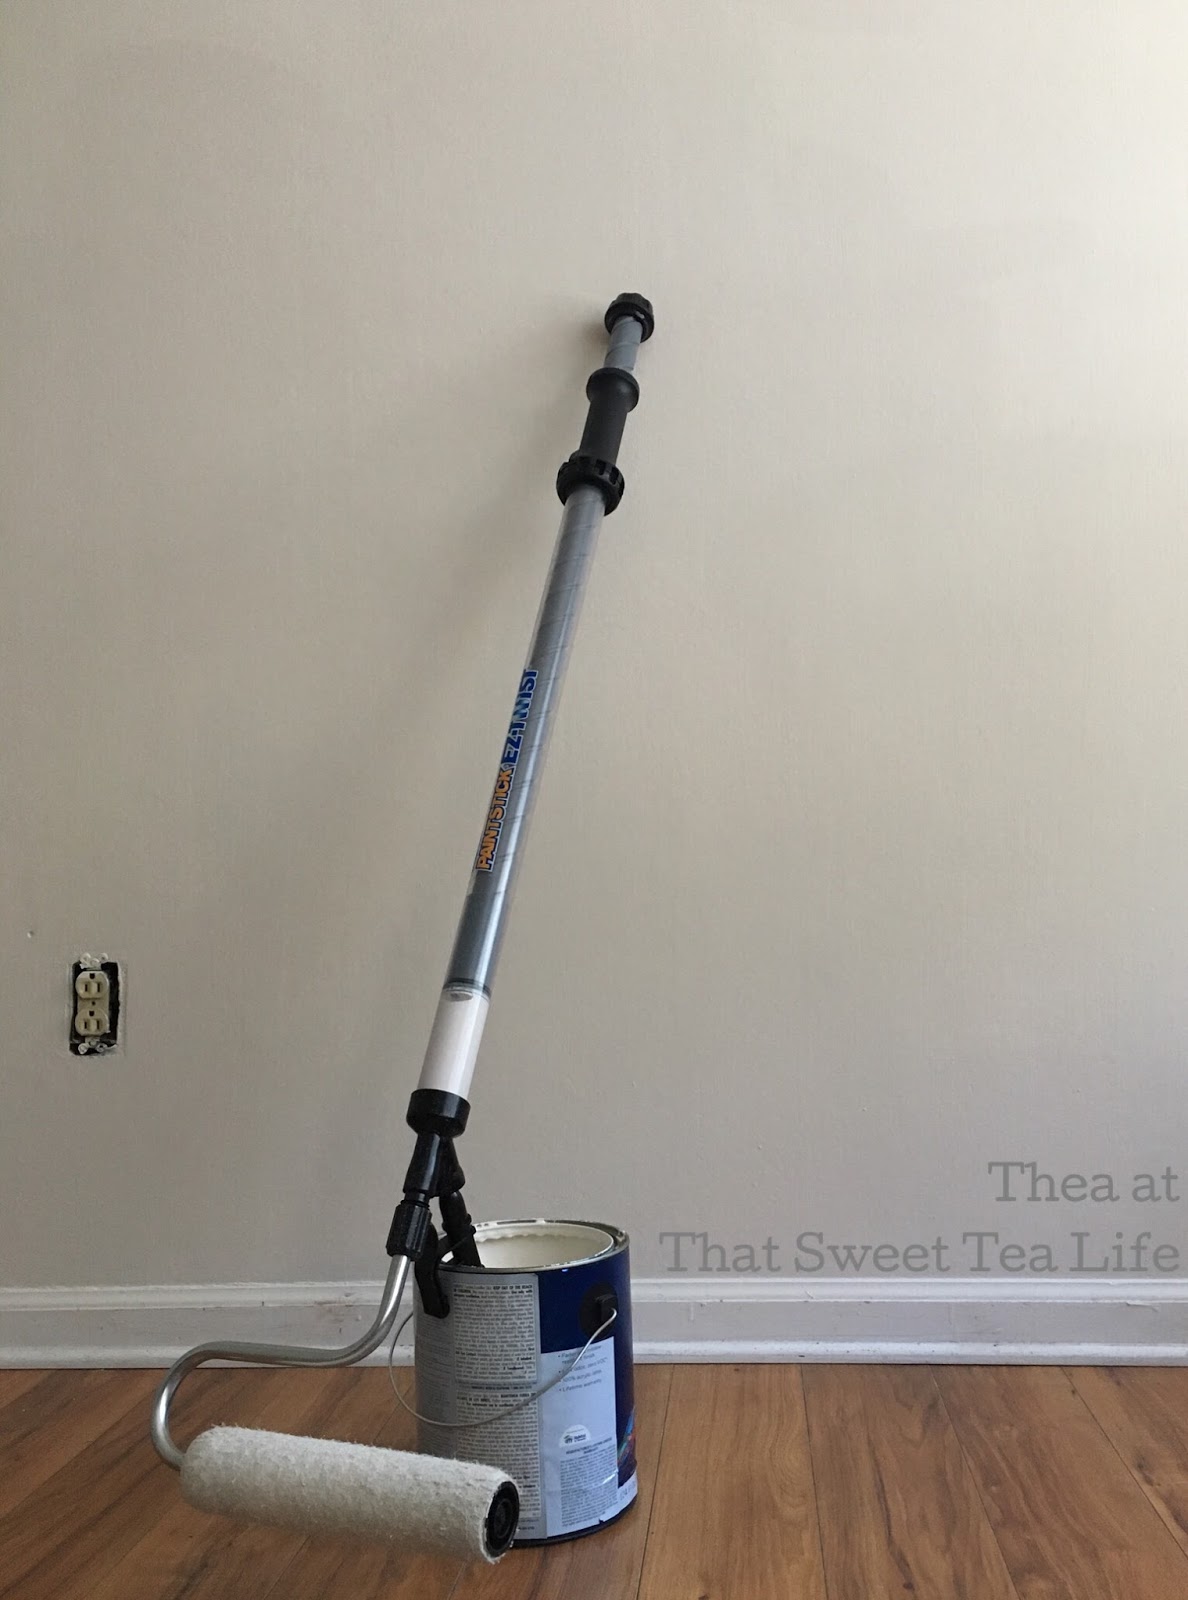 Faux Shiplap-Homeright EZ Twist Stick The Shiplap Wall Hack that can save you Thousands! by Thea at That Sweet Tea Life | DIY Shiplap |faux shiplap | shiplap hack | wall ideas | shiplap walls | installing shiplap | how to shiplap | faux walls #Shiplap #DIYShiplap #Shiplaphack #wallideas #Fauxshiplap